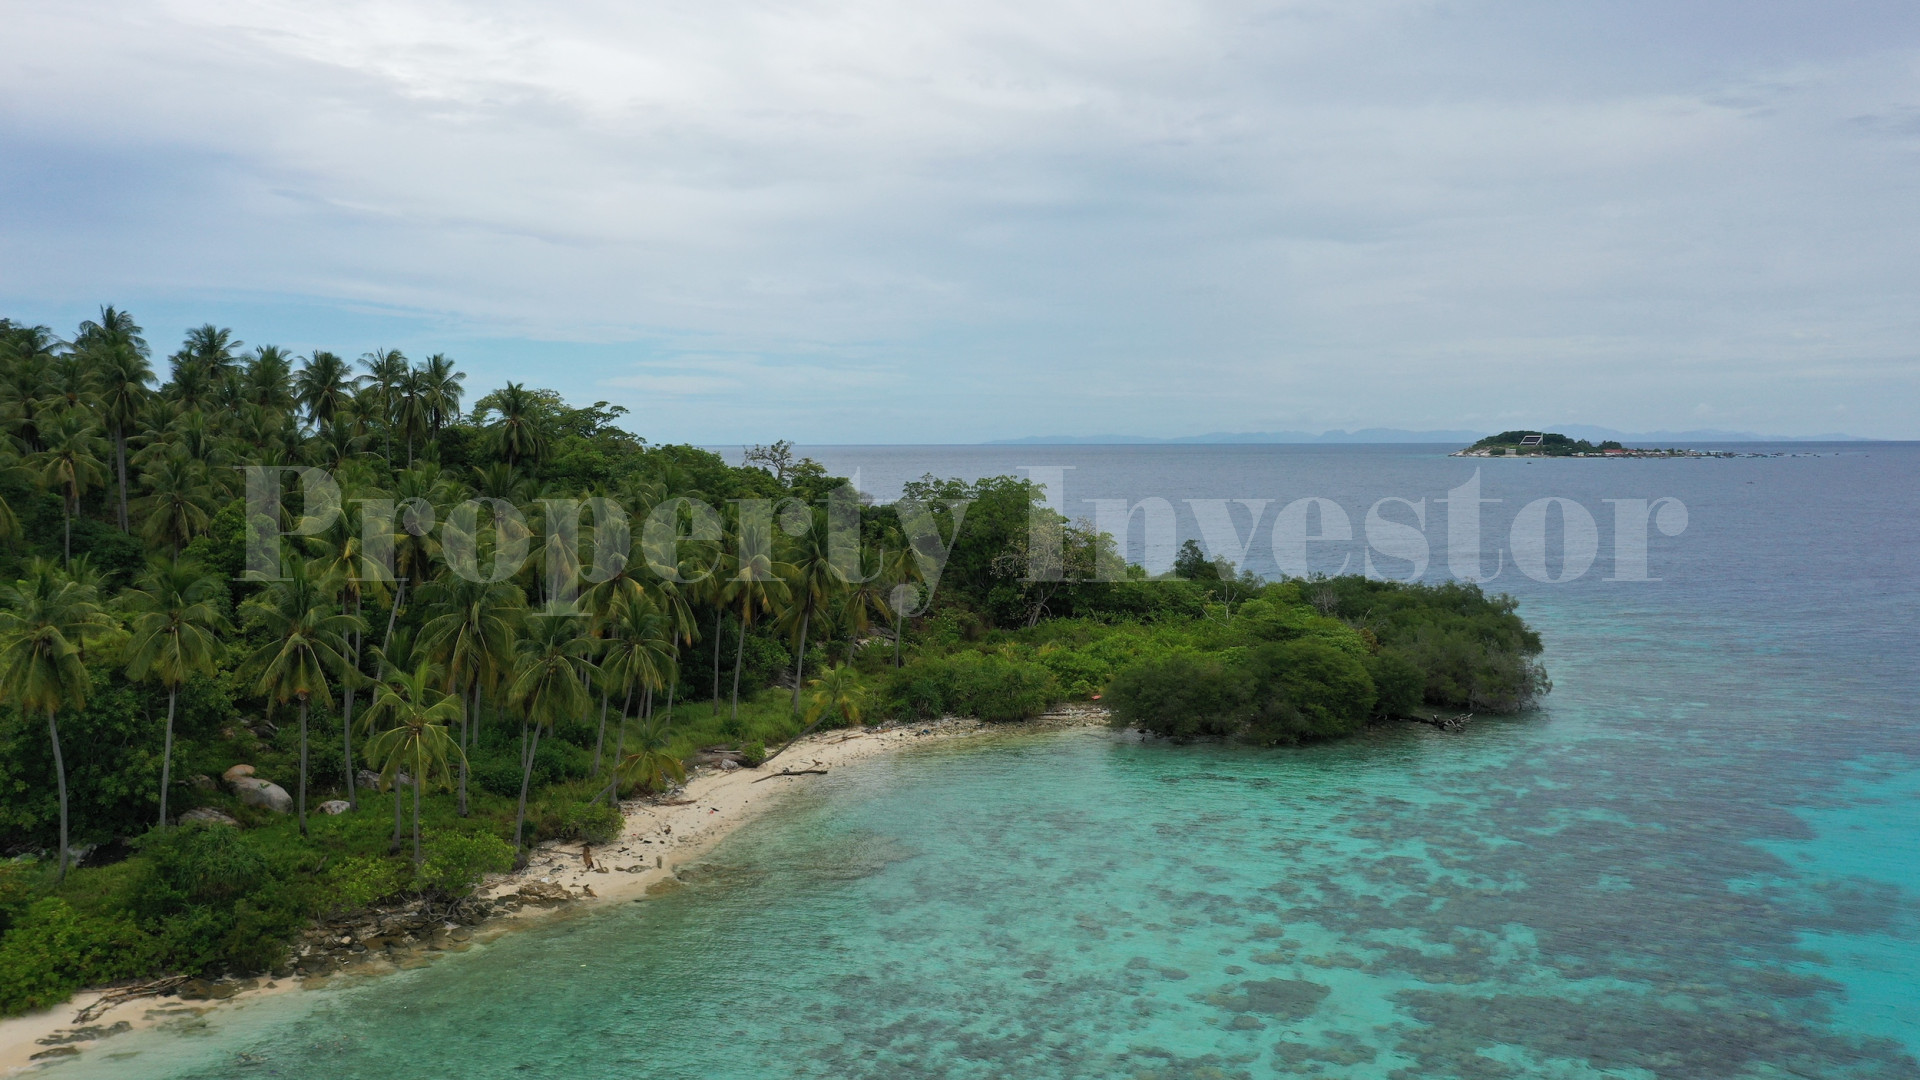 Stunning 5 Hectare Private Virgin Tropical Island for Commercial or Residential Development in the Riau Islands, Indonesia